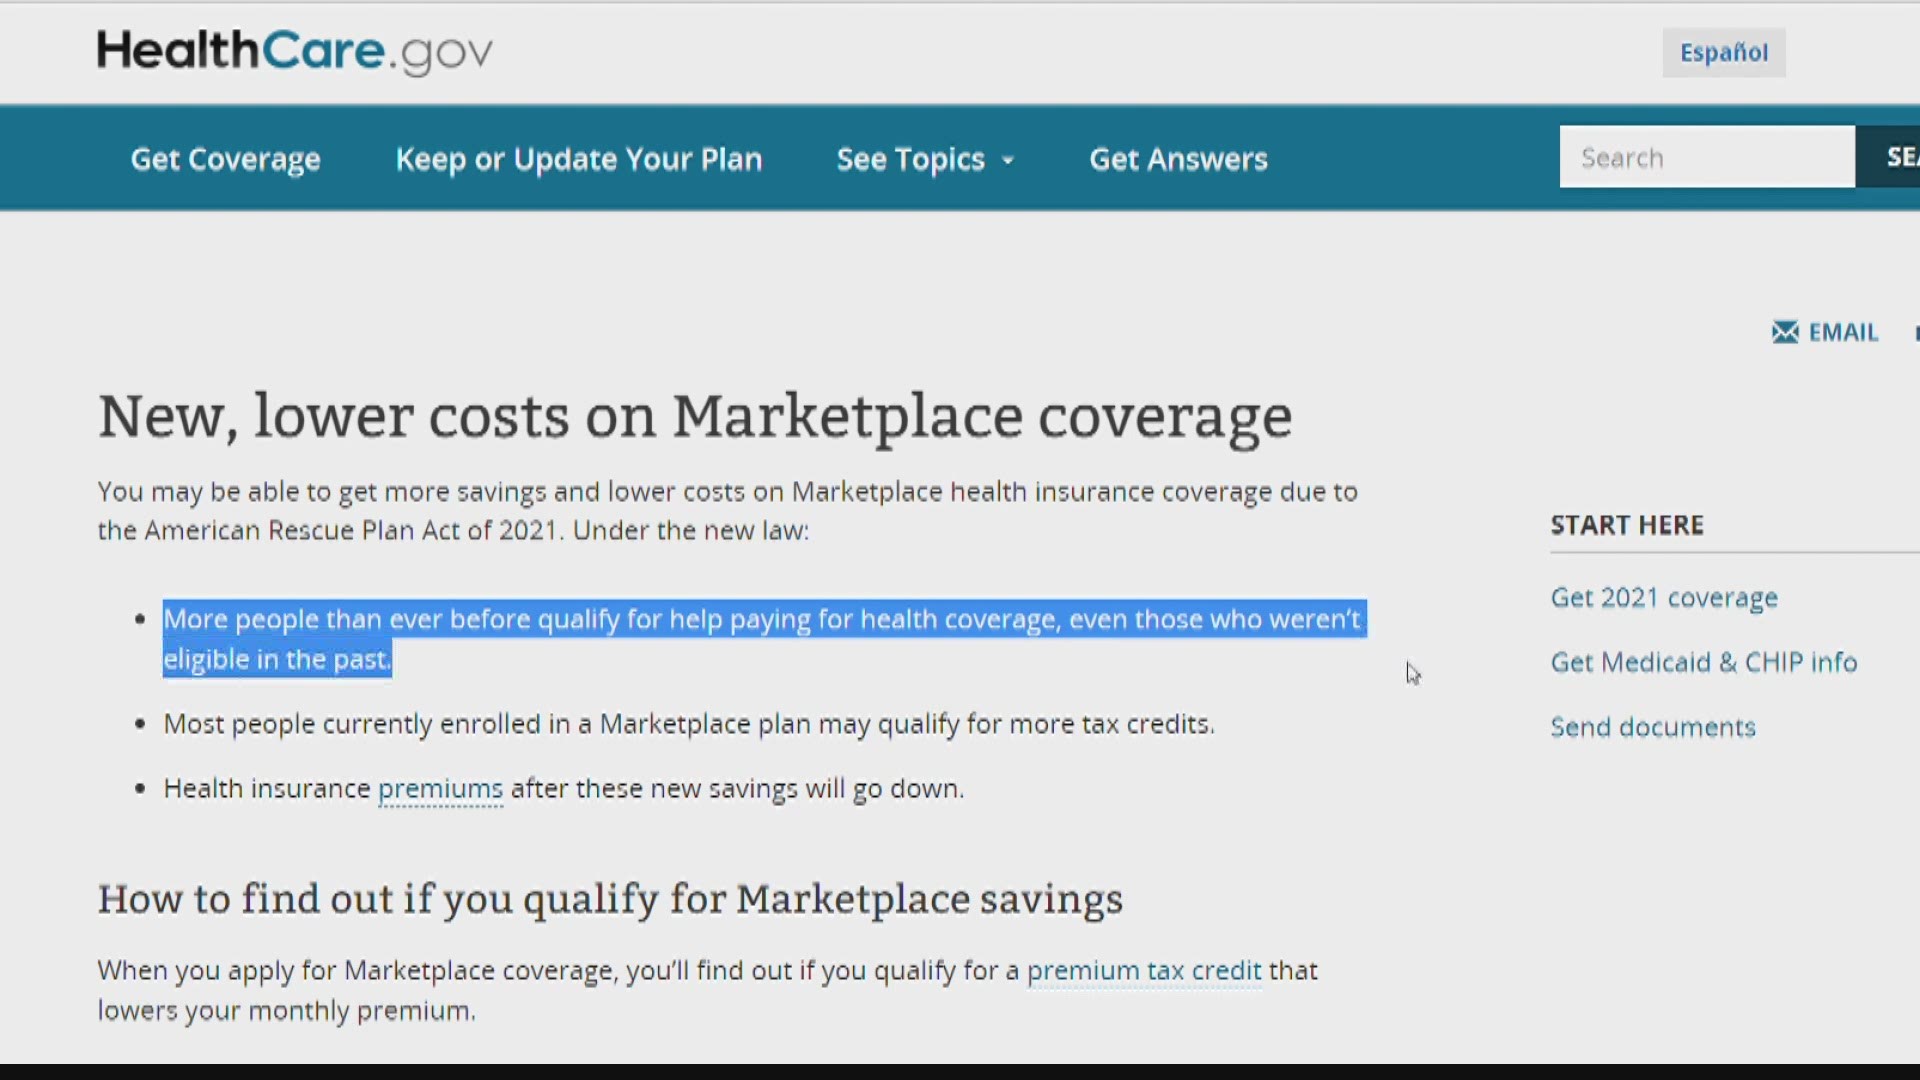 A federal relief package is lowering premiums for people who got insurance through the marketplace.